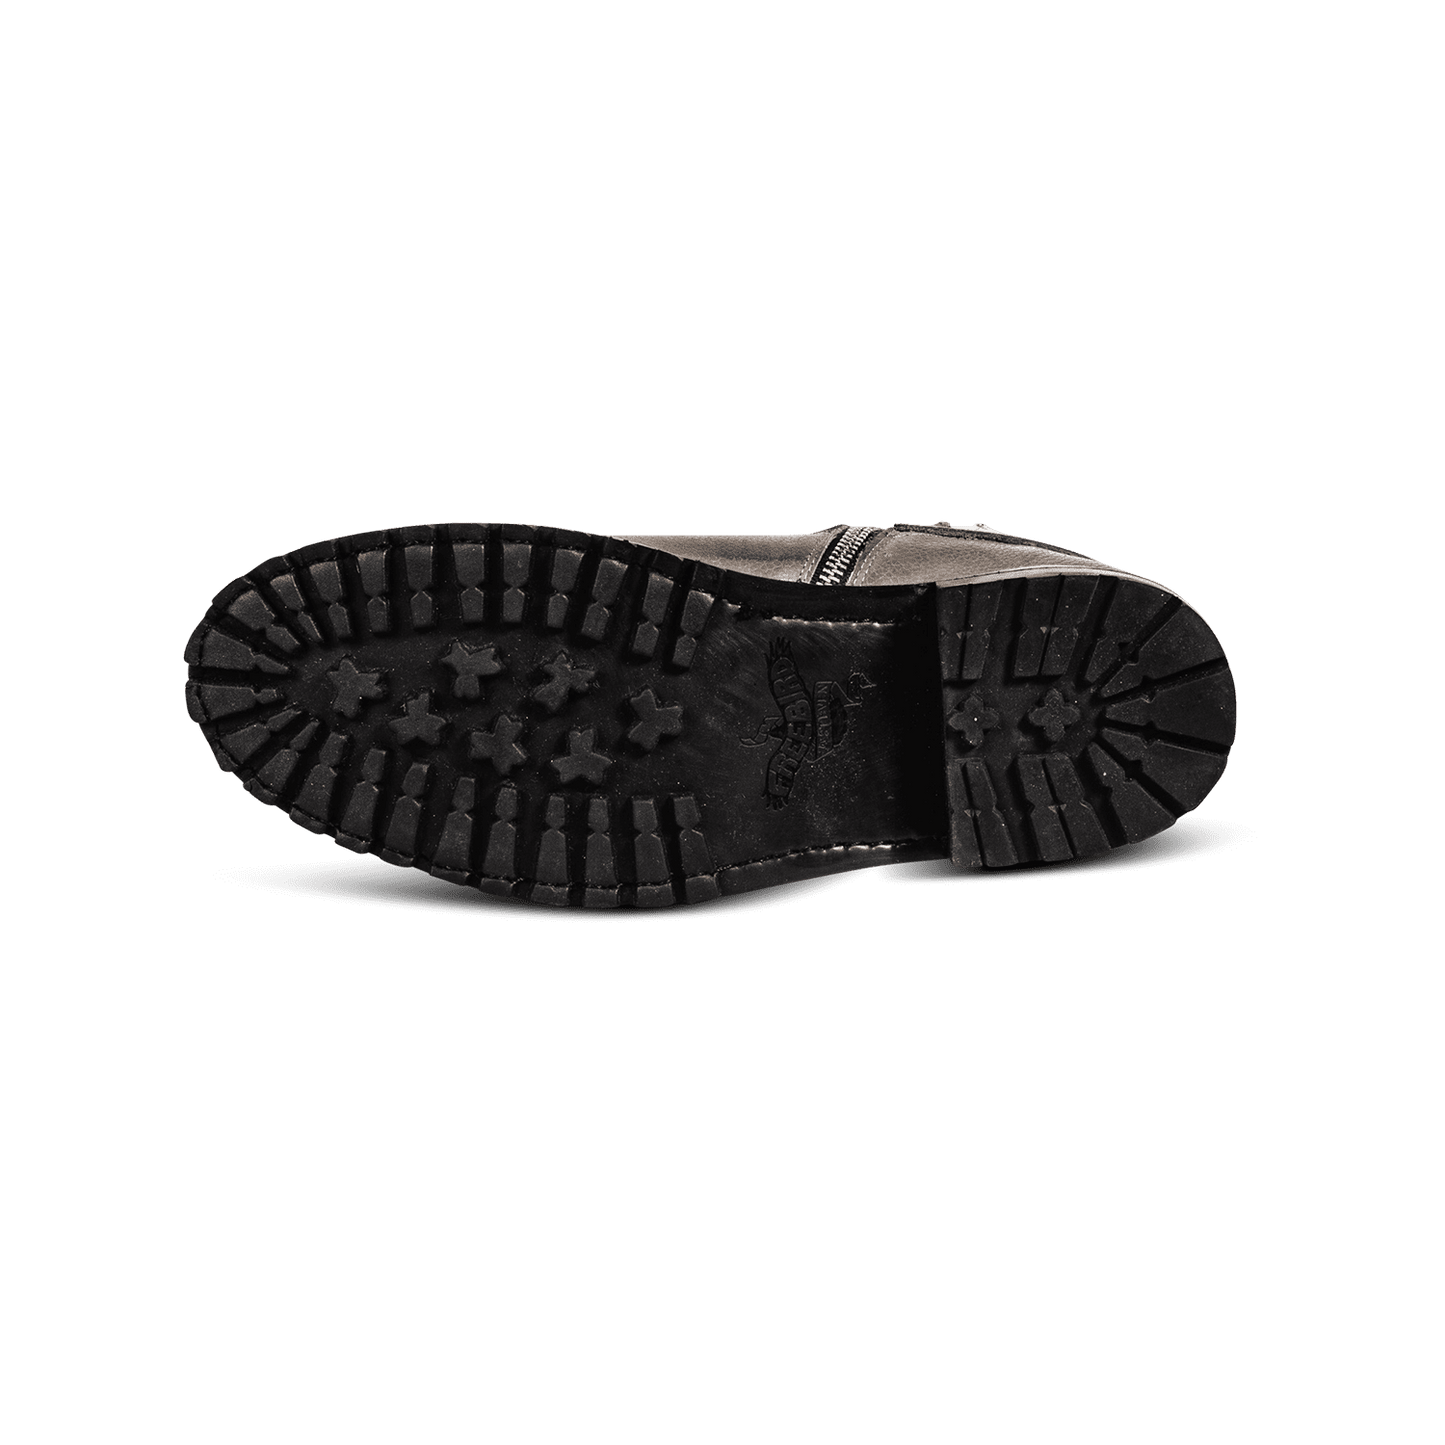 Tread sole imprinted with FREEBIRD on men's Ozzie stone boot